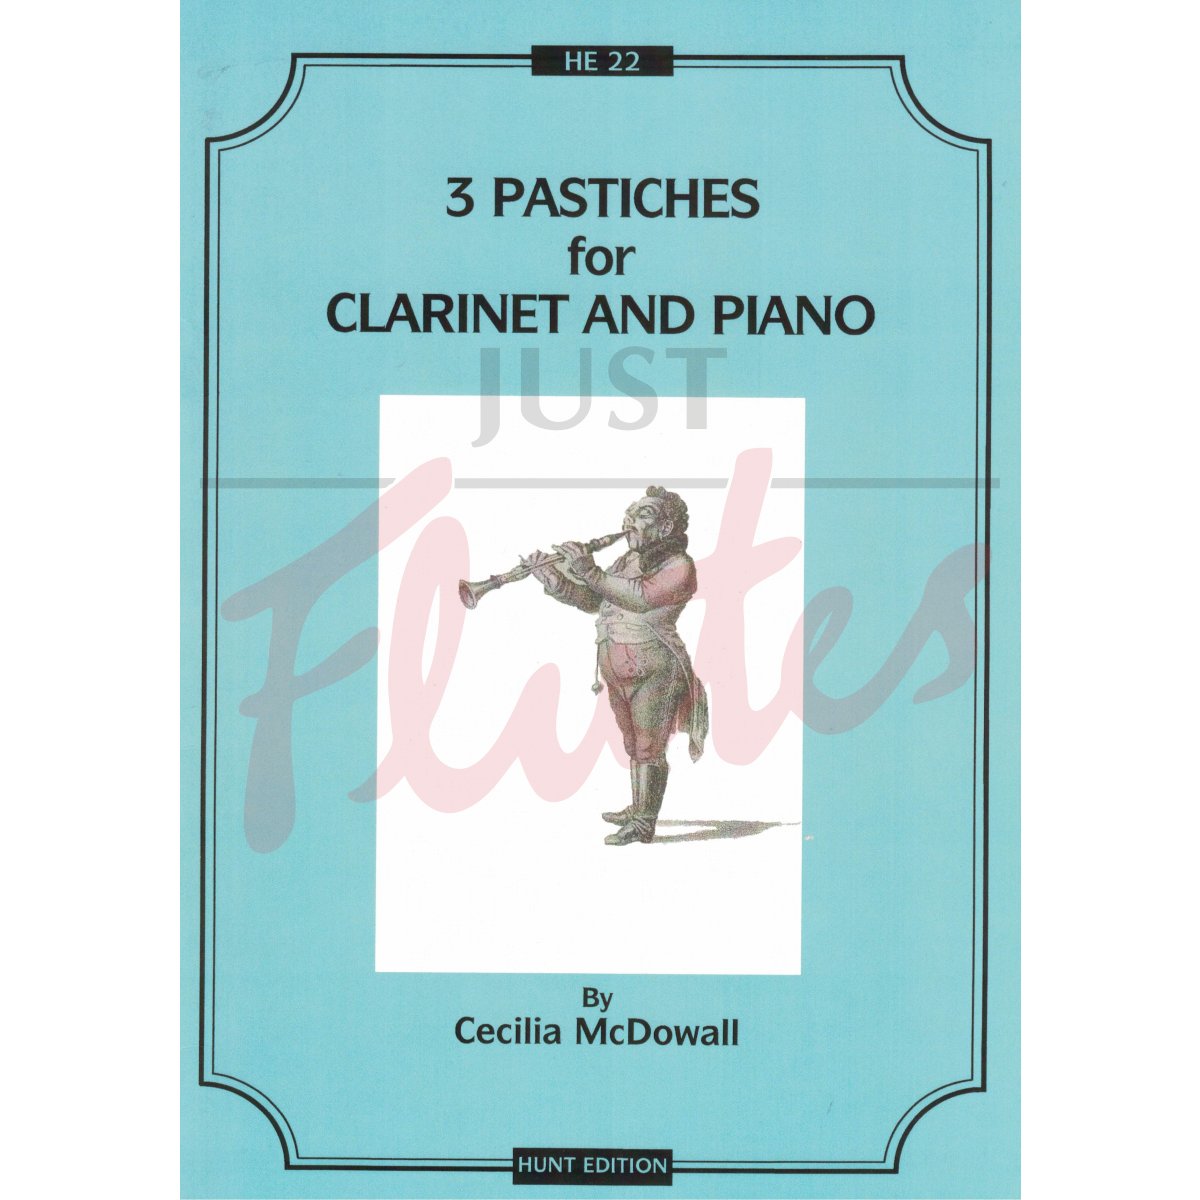 Three Pastiches for Clarinet and Piano